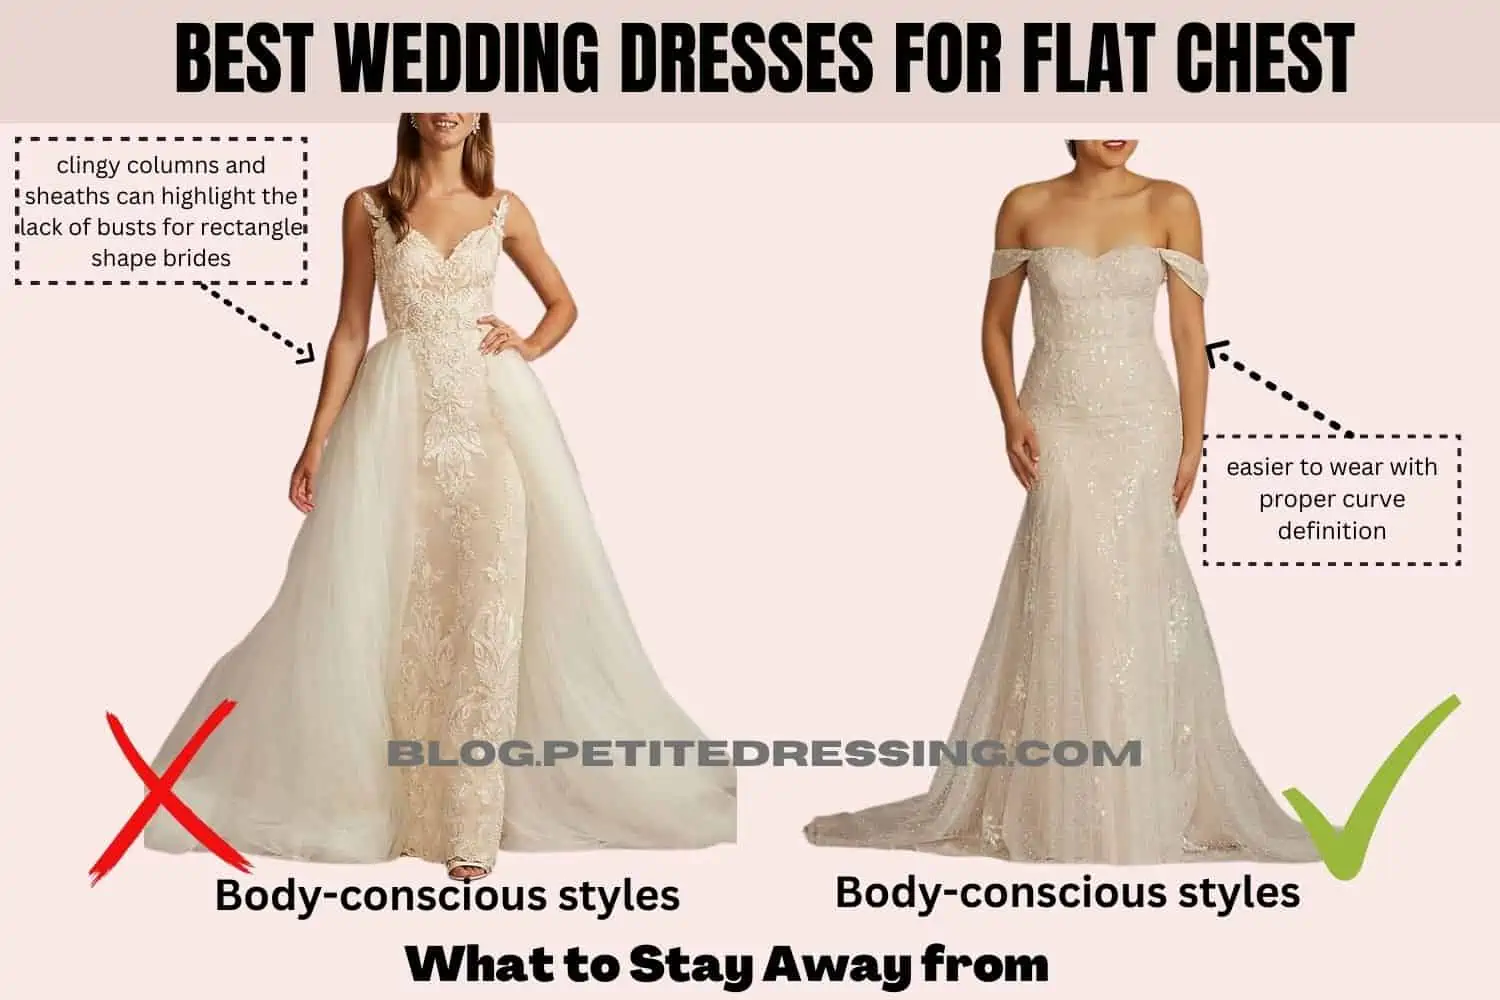 How To Find A Wedding Dress That Flatters Big Boobs